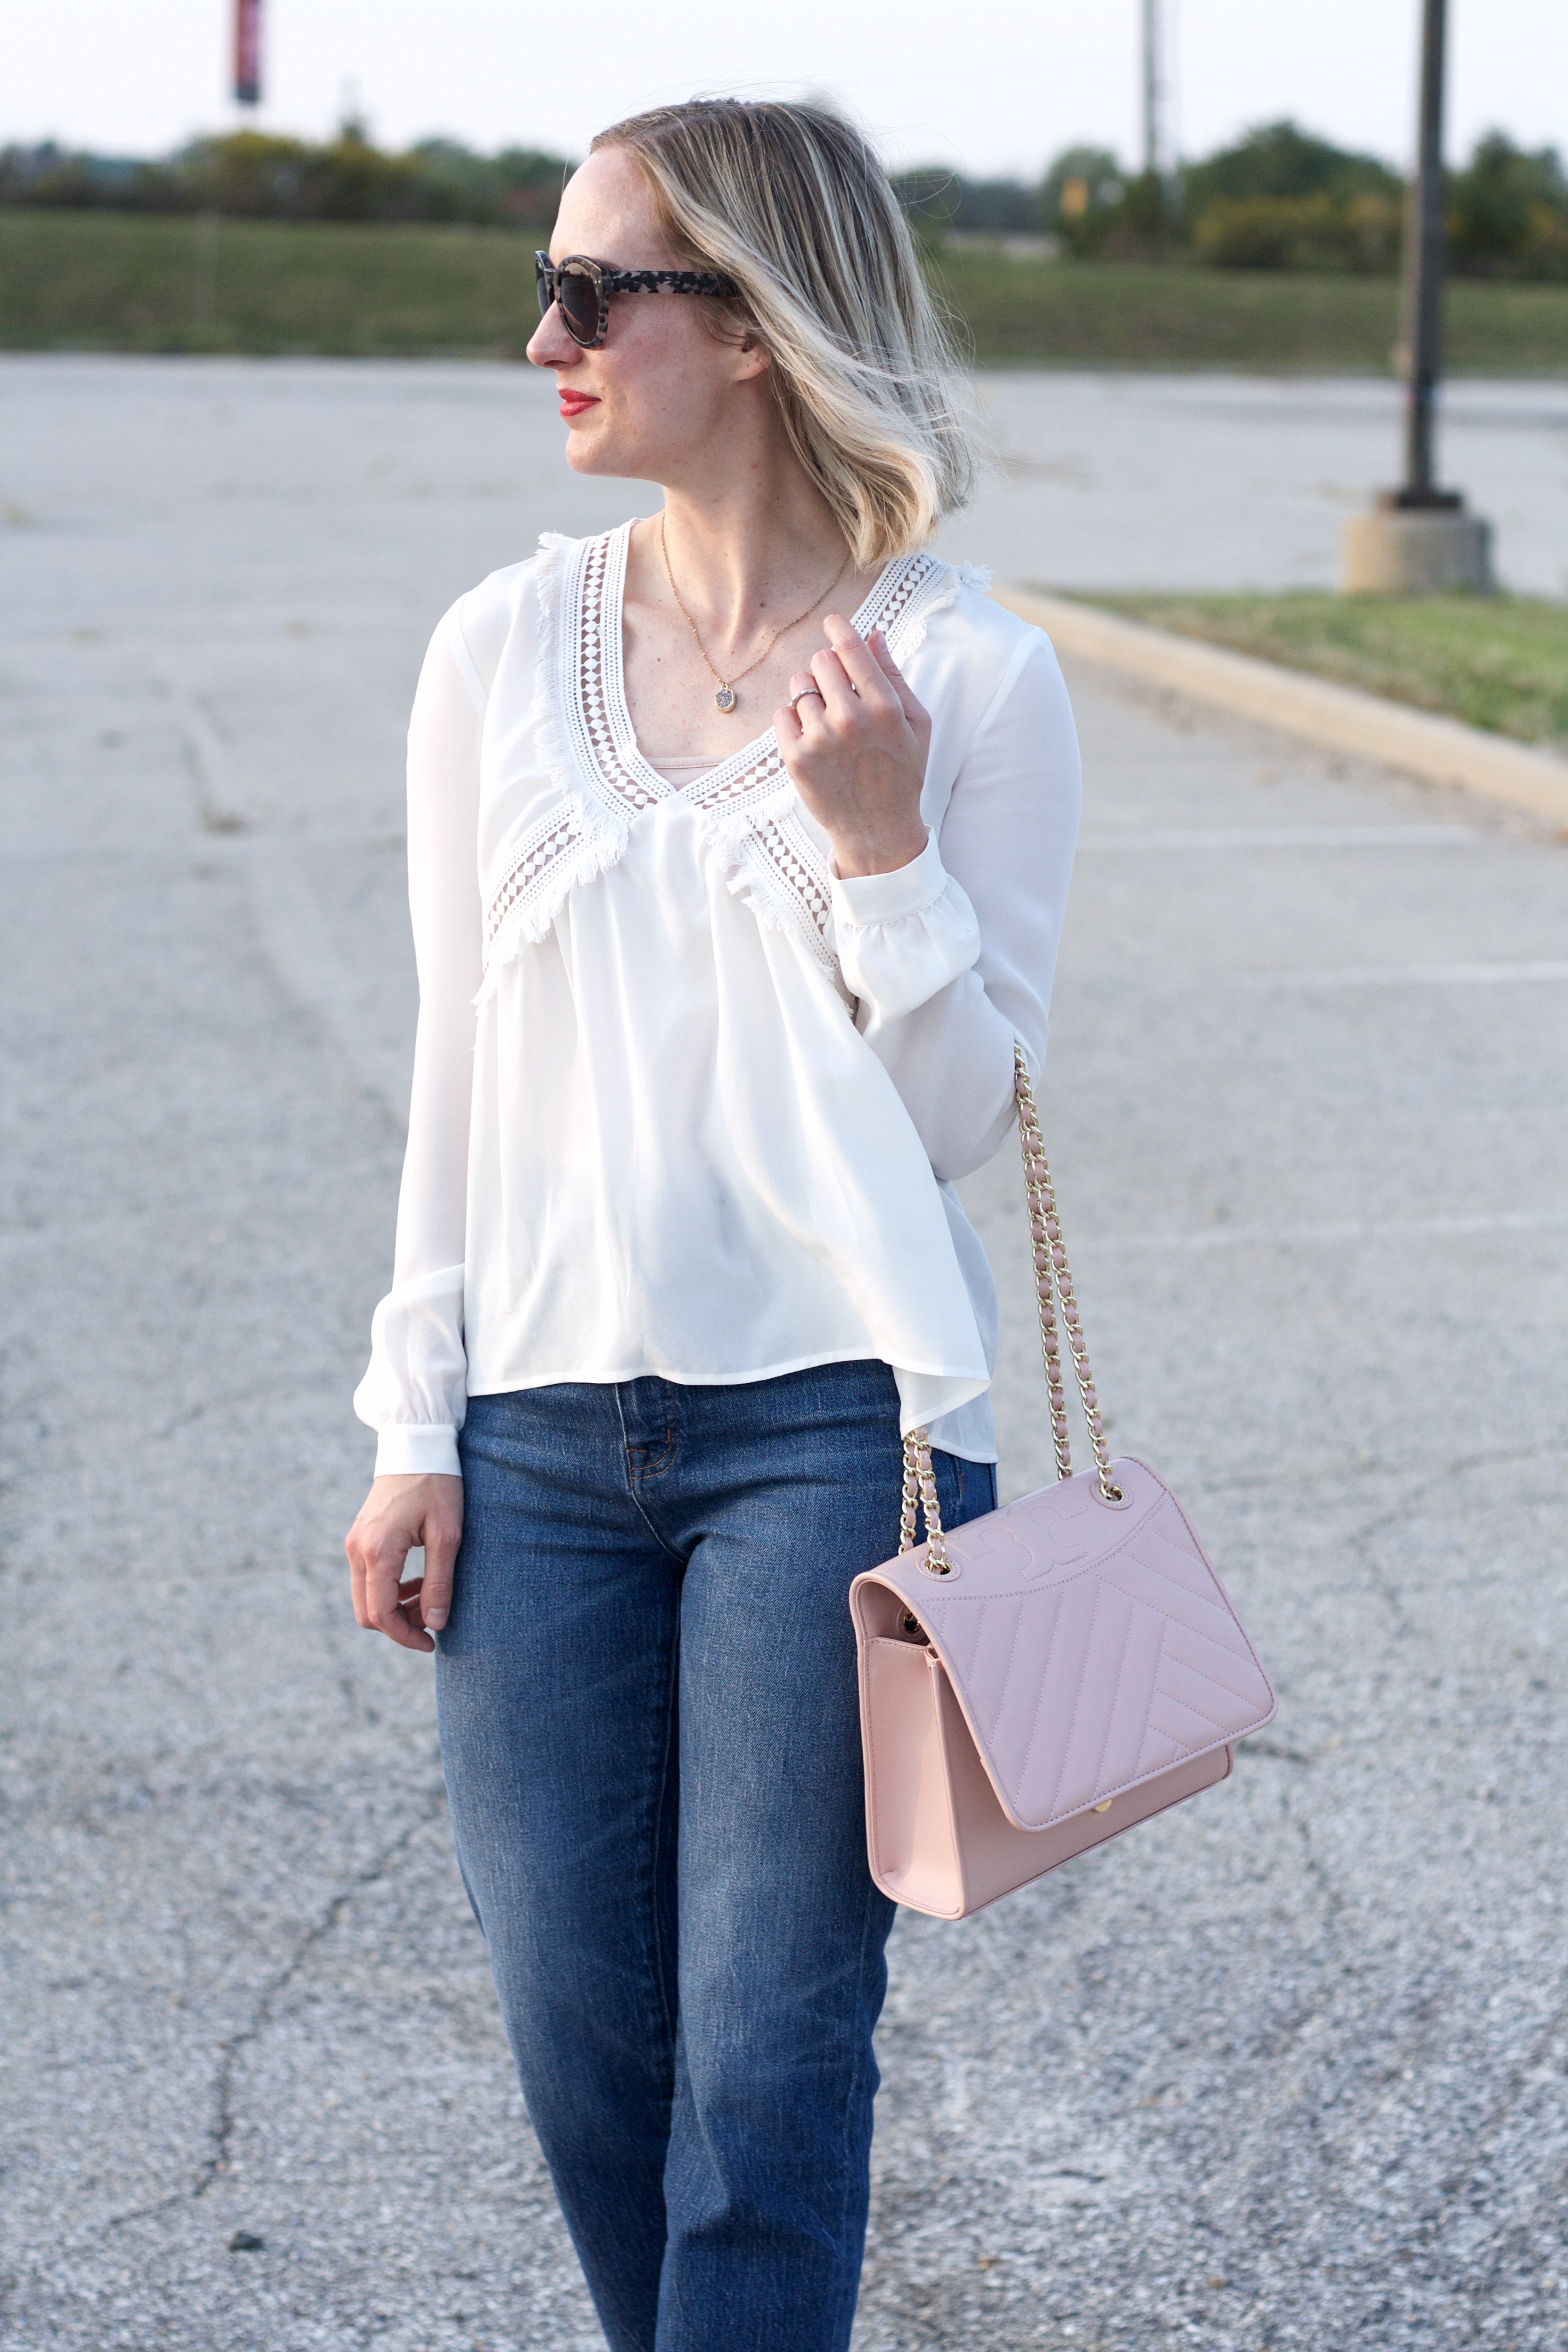 Sezane silk top, Madewell cropped jeans, Tory Burch chain strap bag